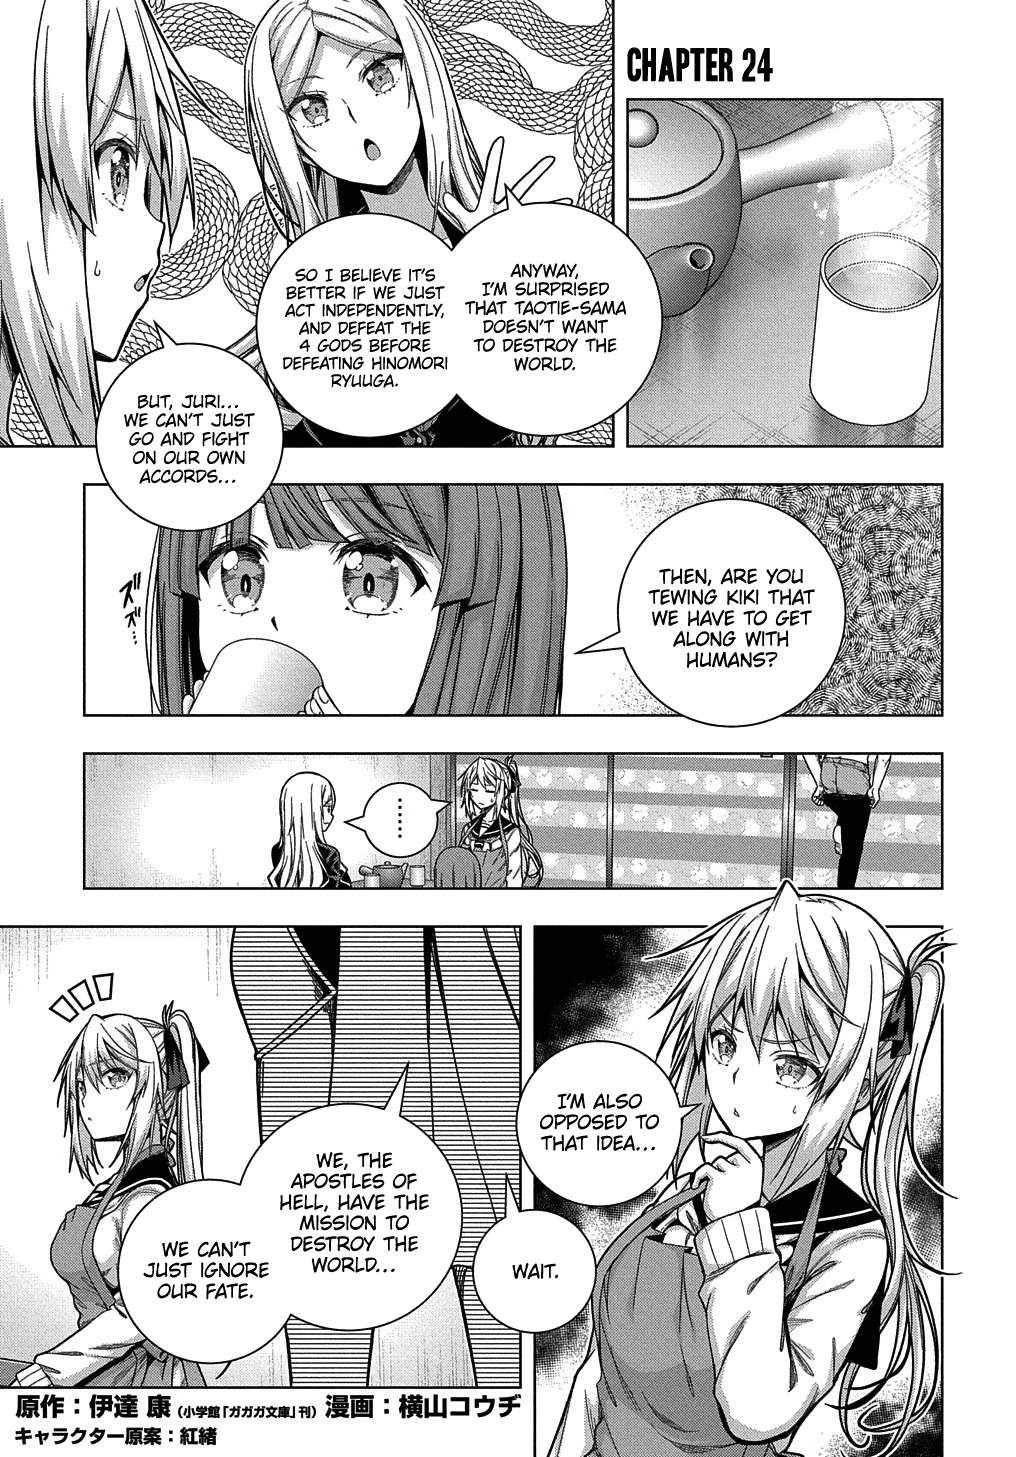 Is It Tough Being A Friend? - Page 2